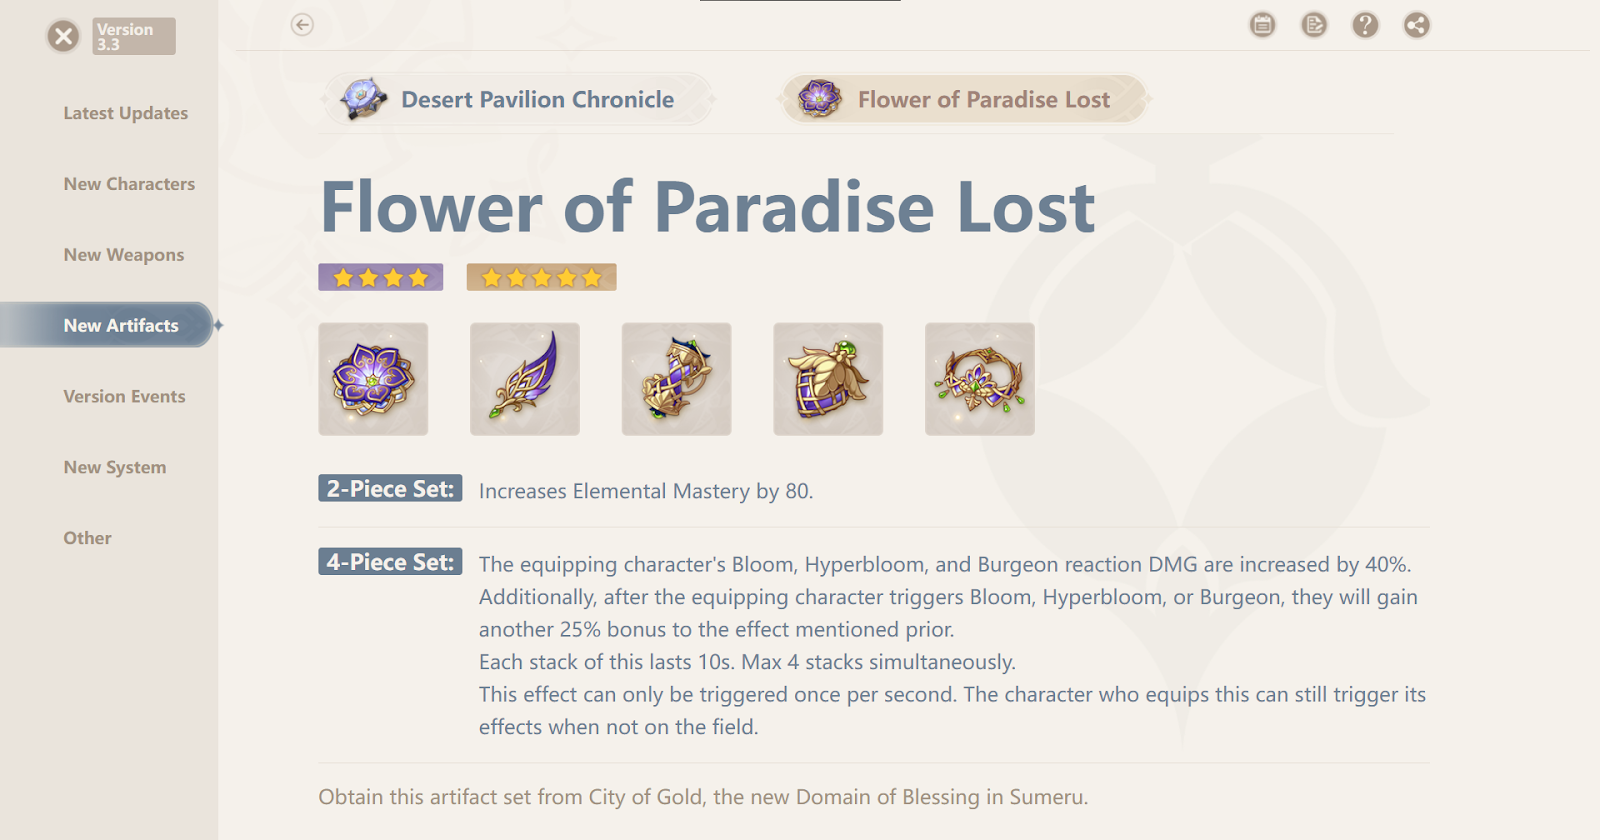 Flower of Paradise Lost